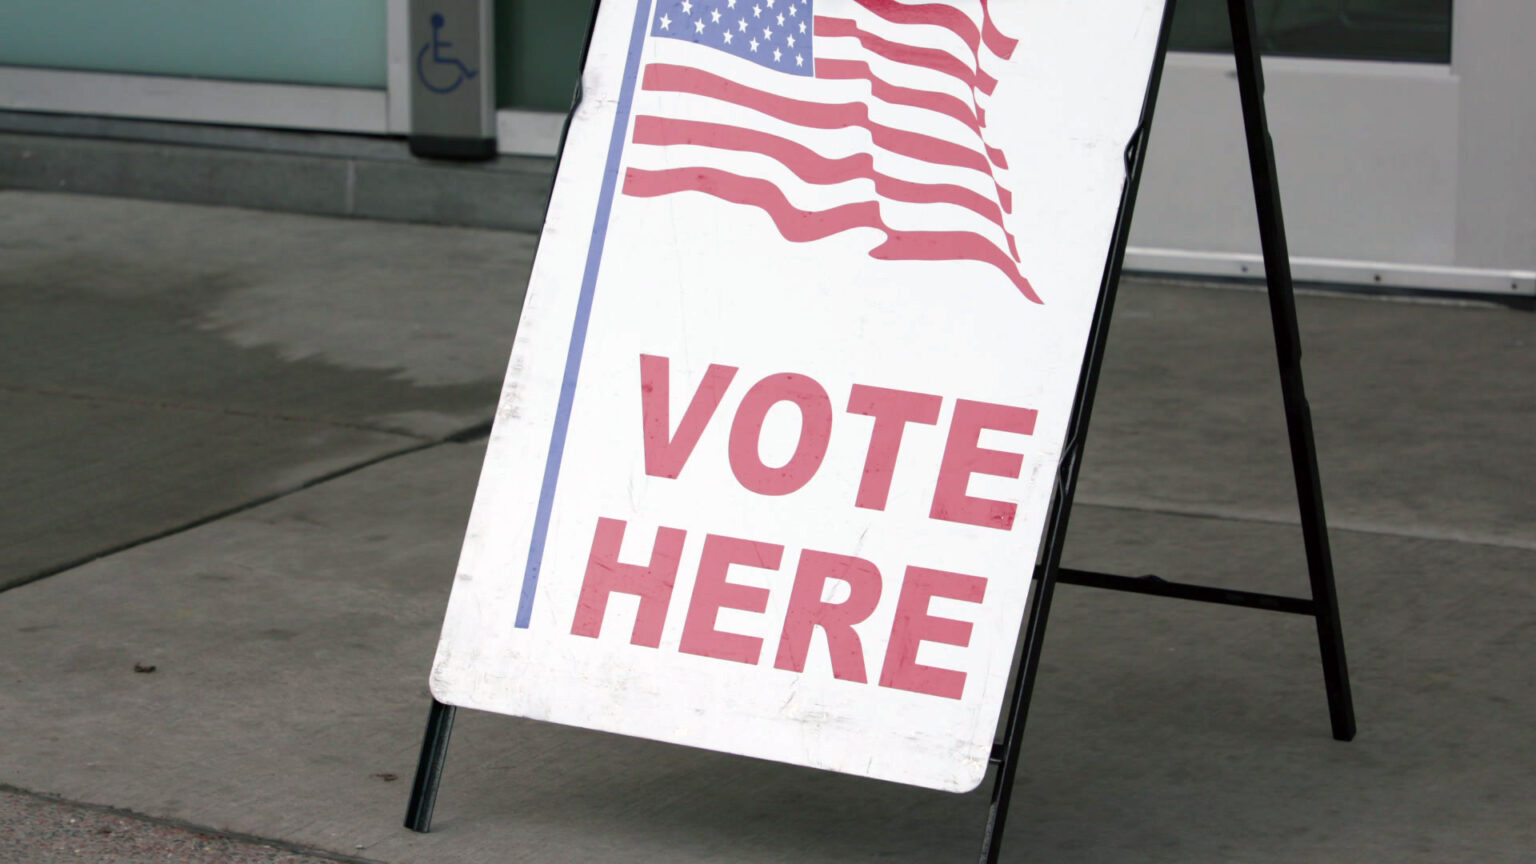 A sandwich board sign with a graphic of a U.S. flat and the words VOTE HERE stands on pavement in front of closed doors.